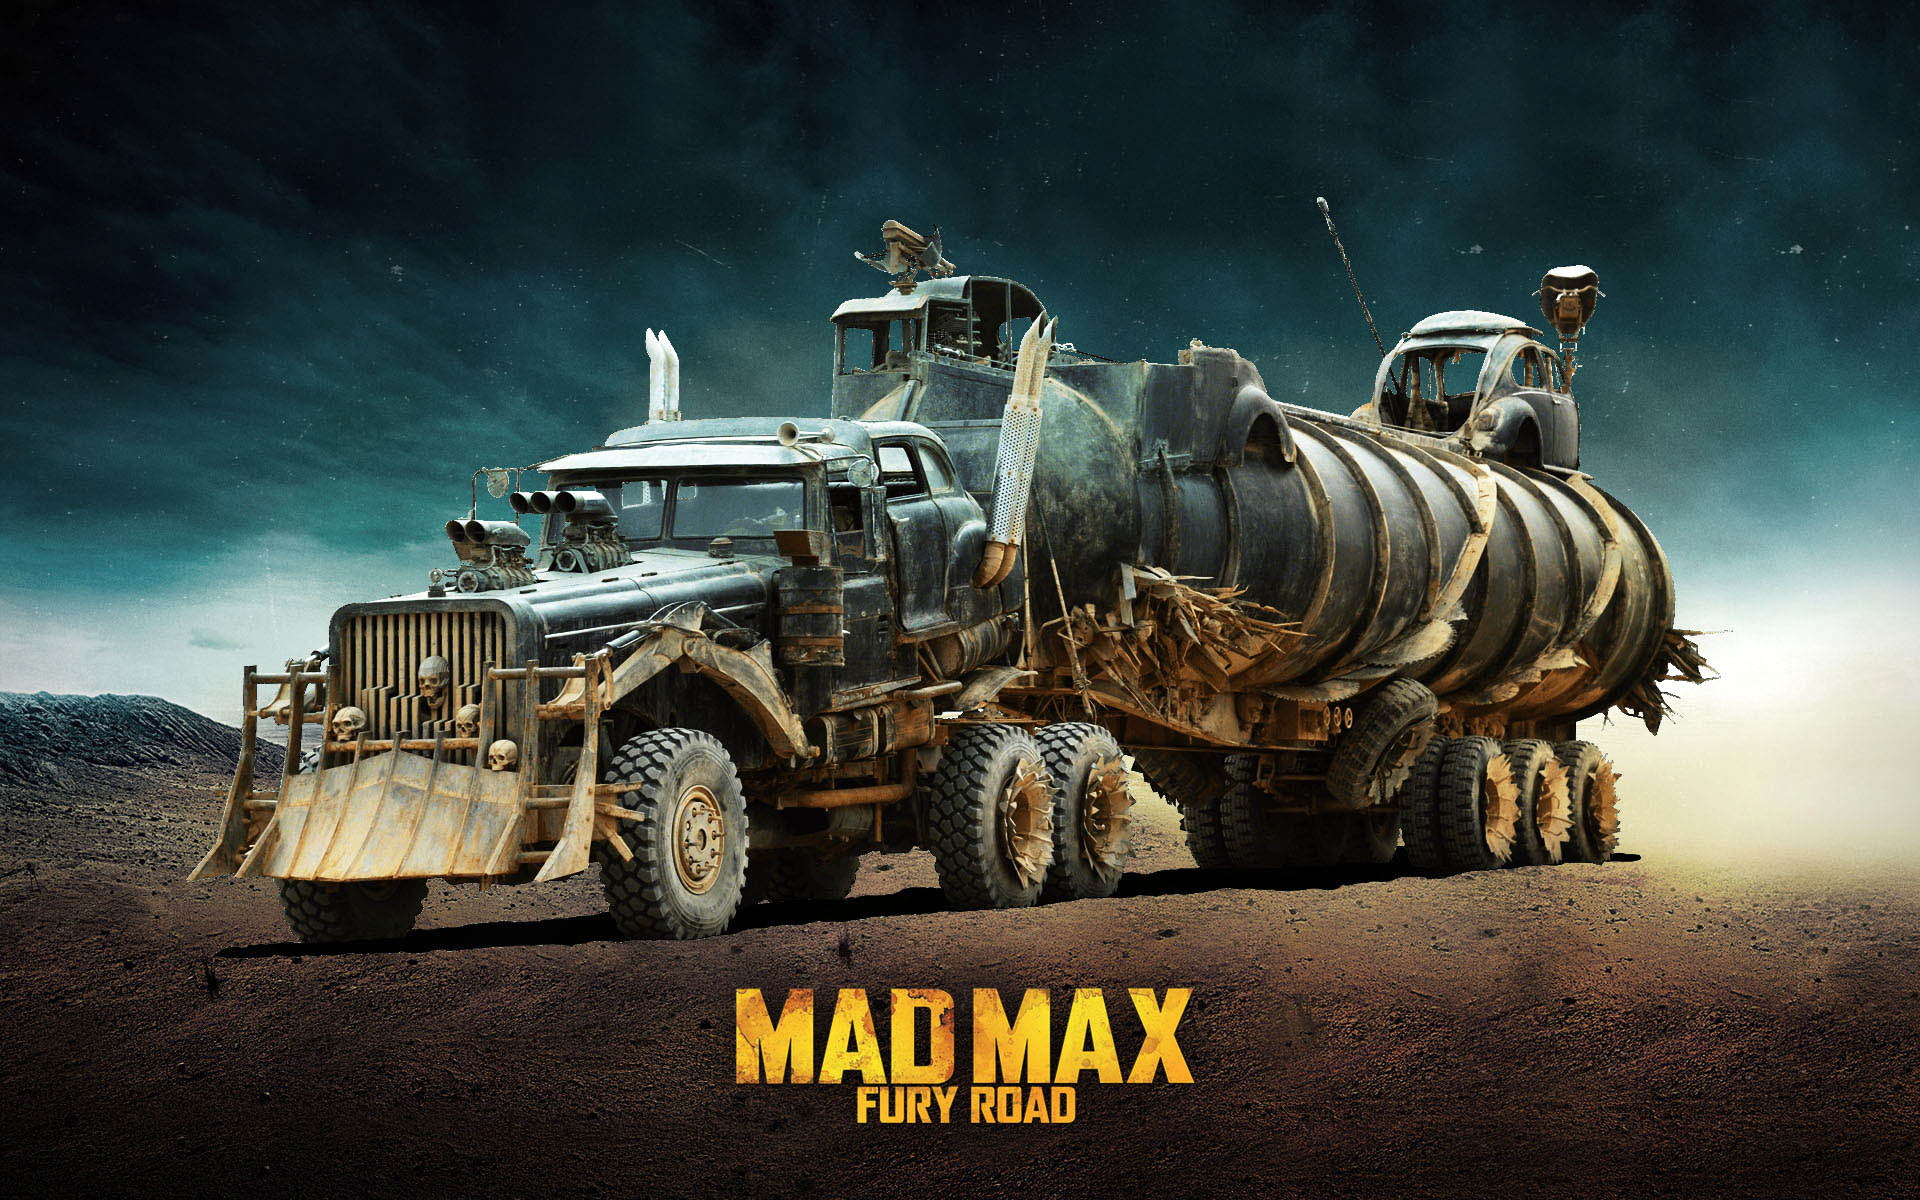 mad max wallpaper hd,mode of transport,vehicle,transport,poster,pc game